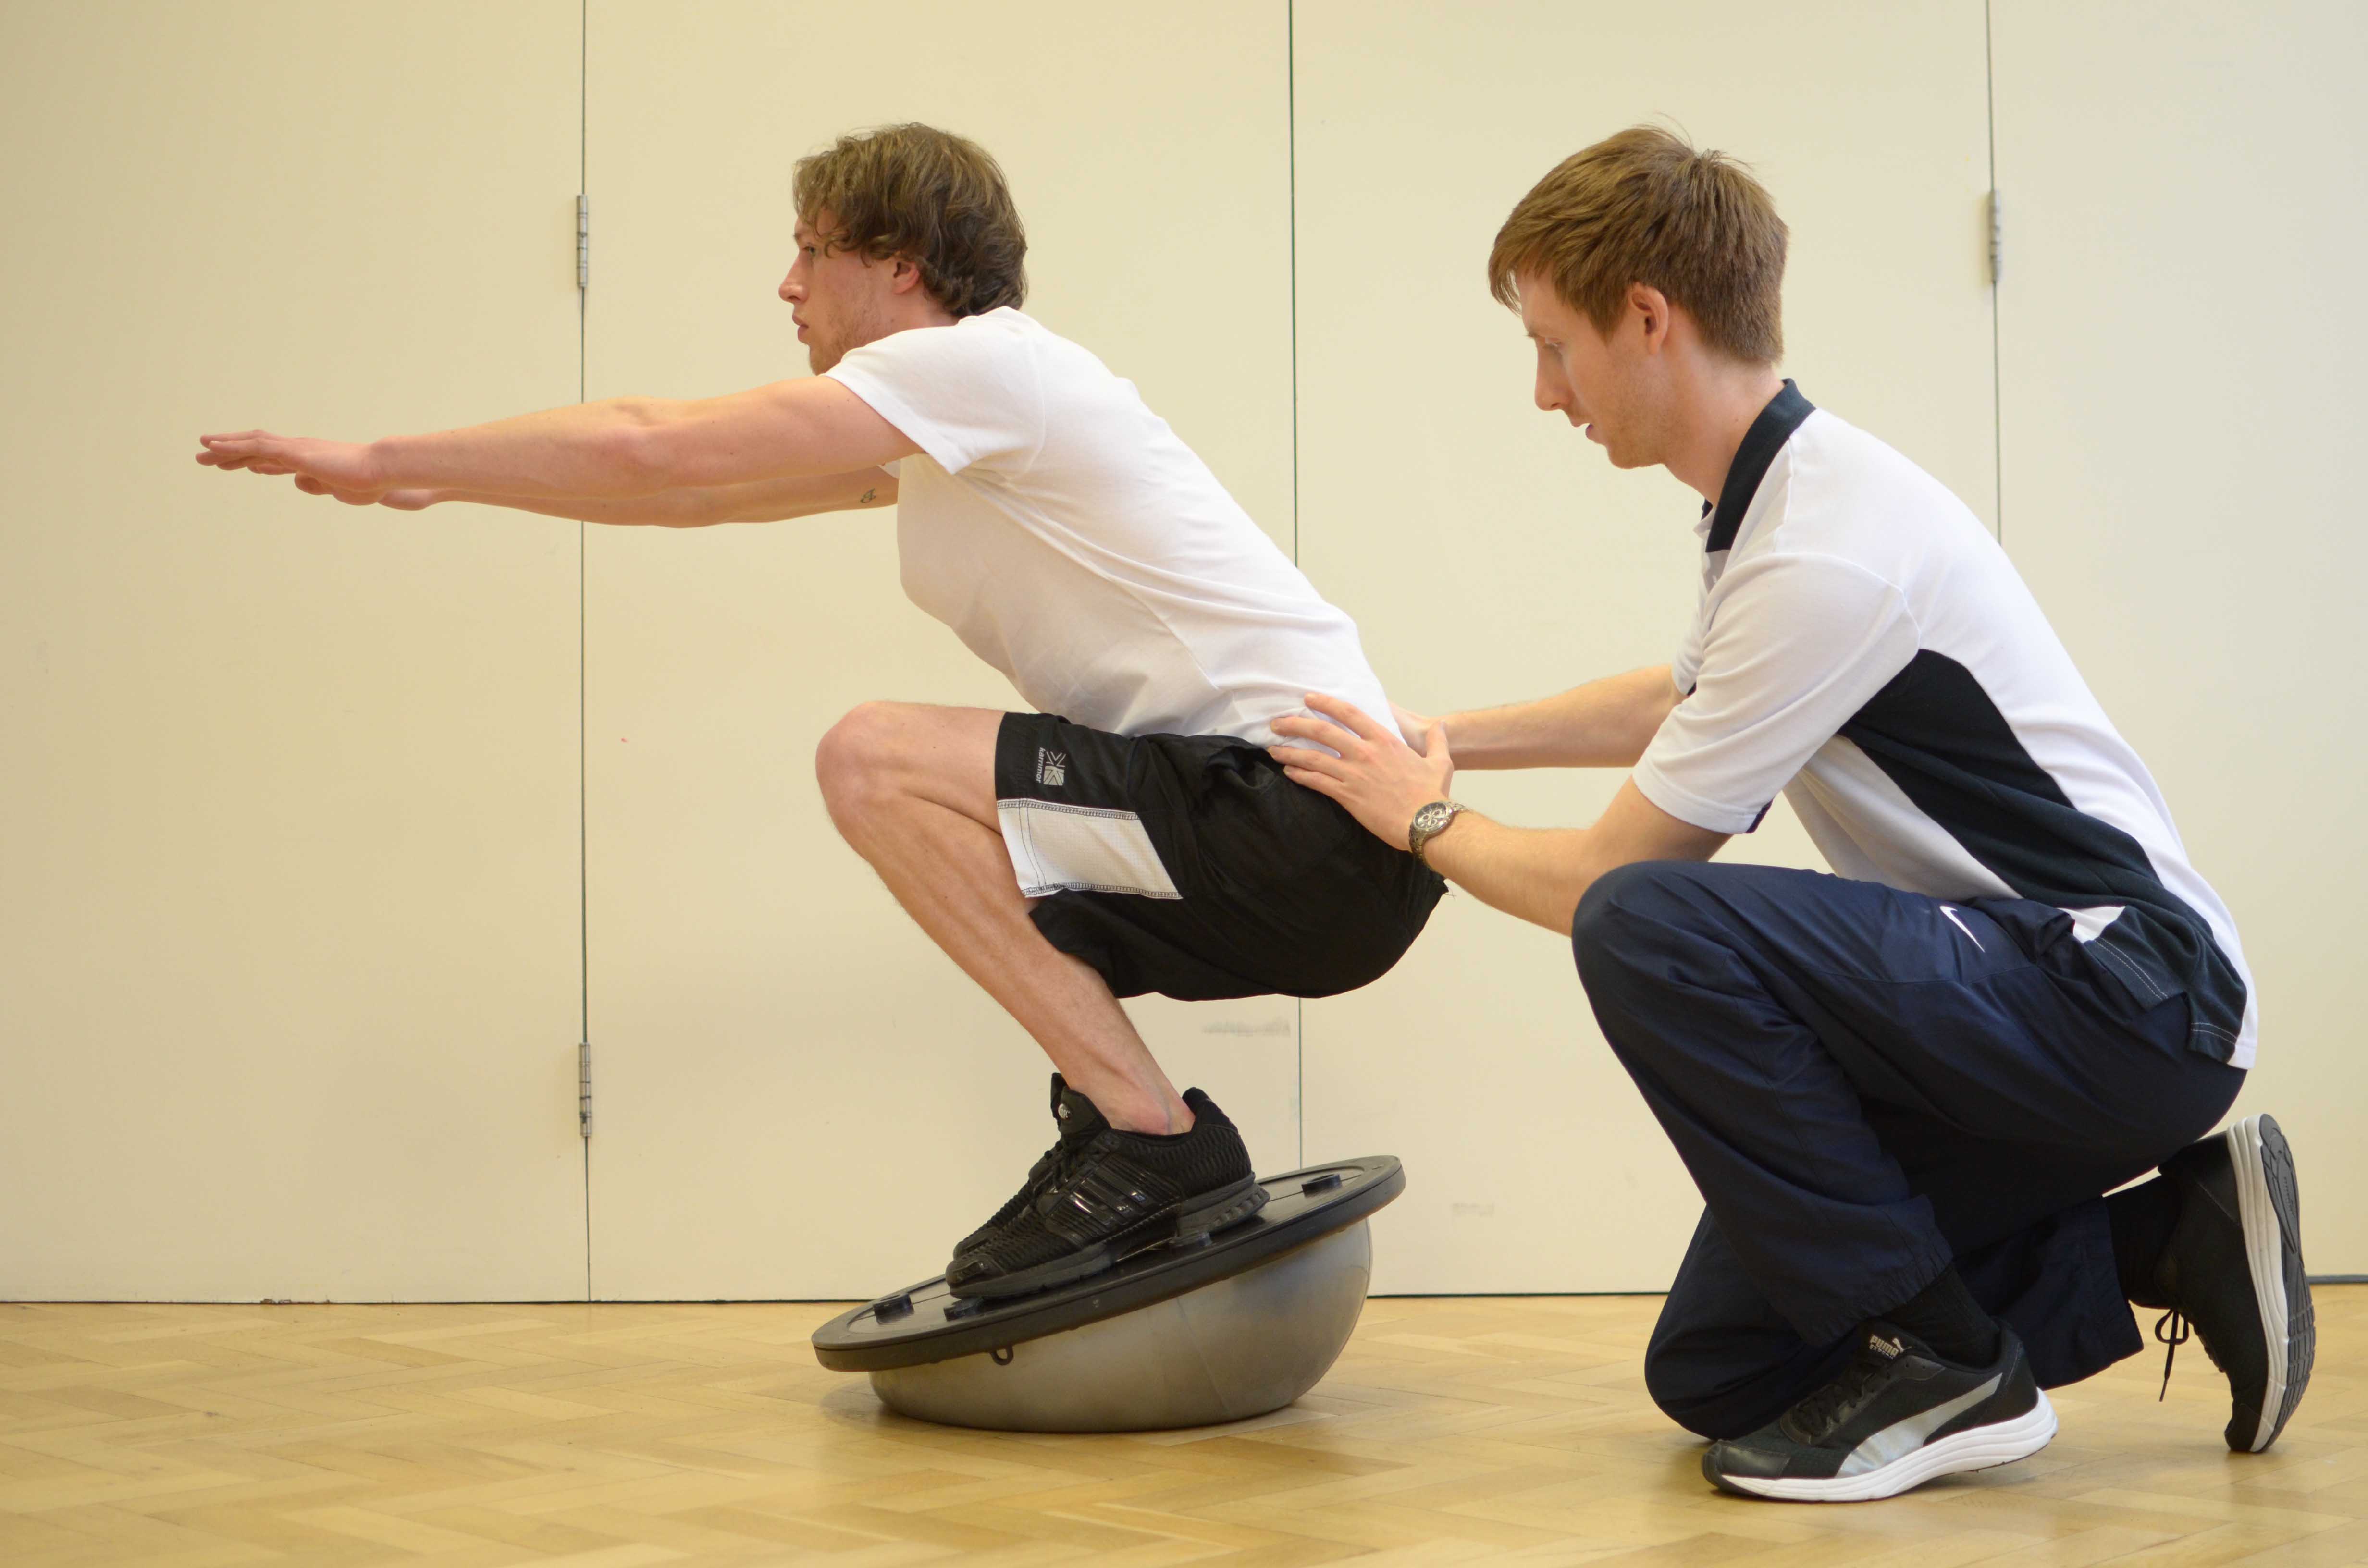 Leg strengthening and stability exercises using squats on a balance board under supervision of specialist MSK physiotherapist